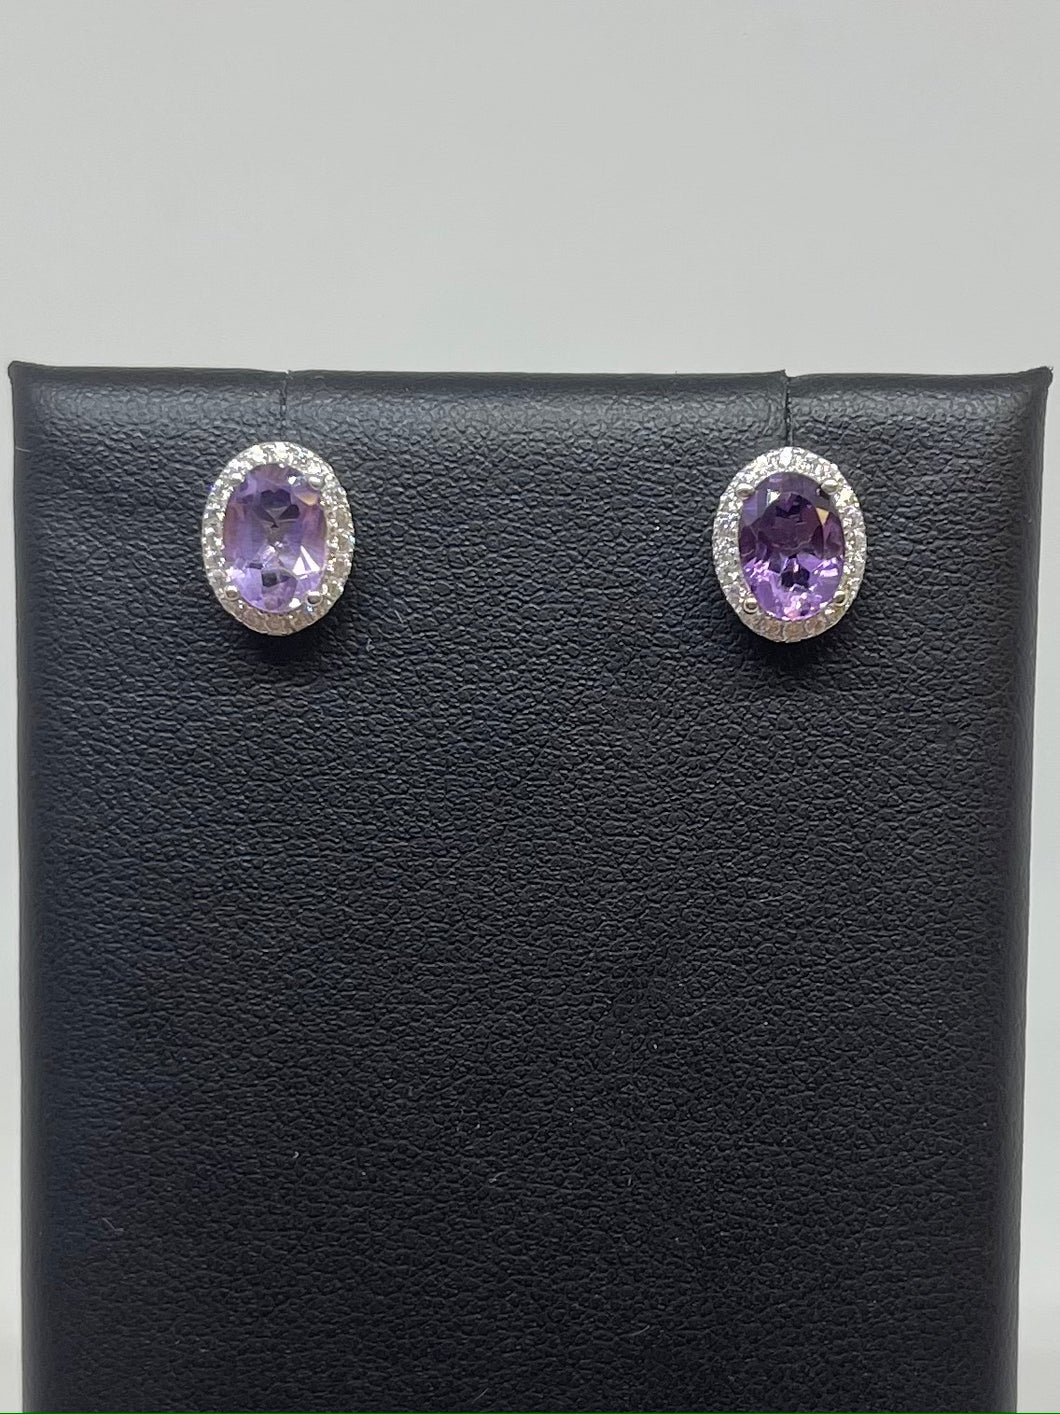 Oval Amethyst and CZ Earrings